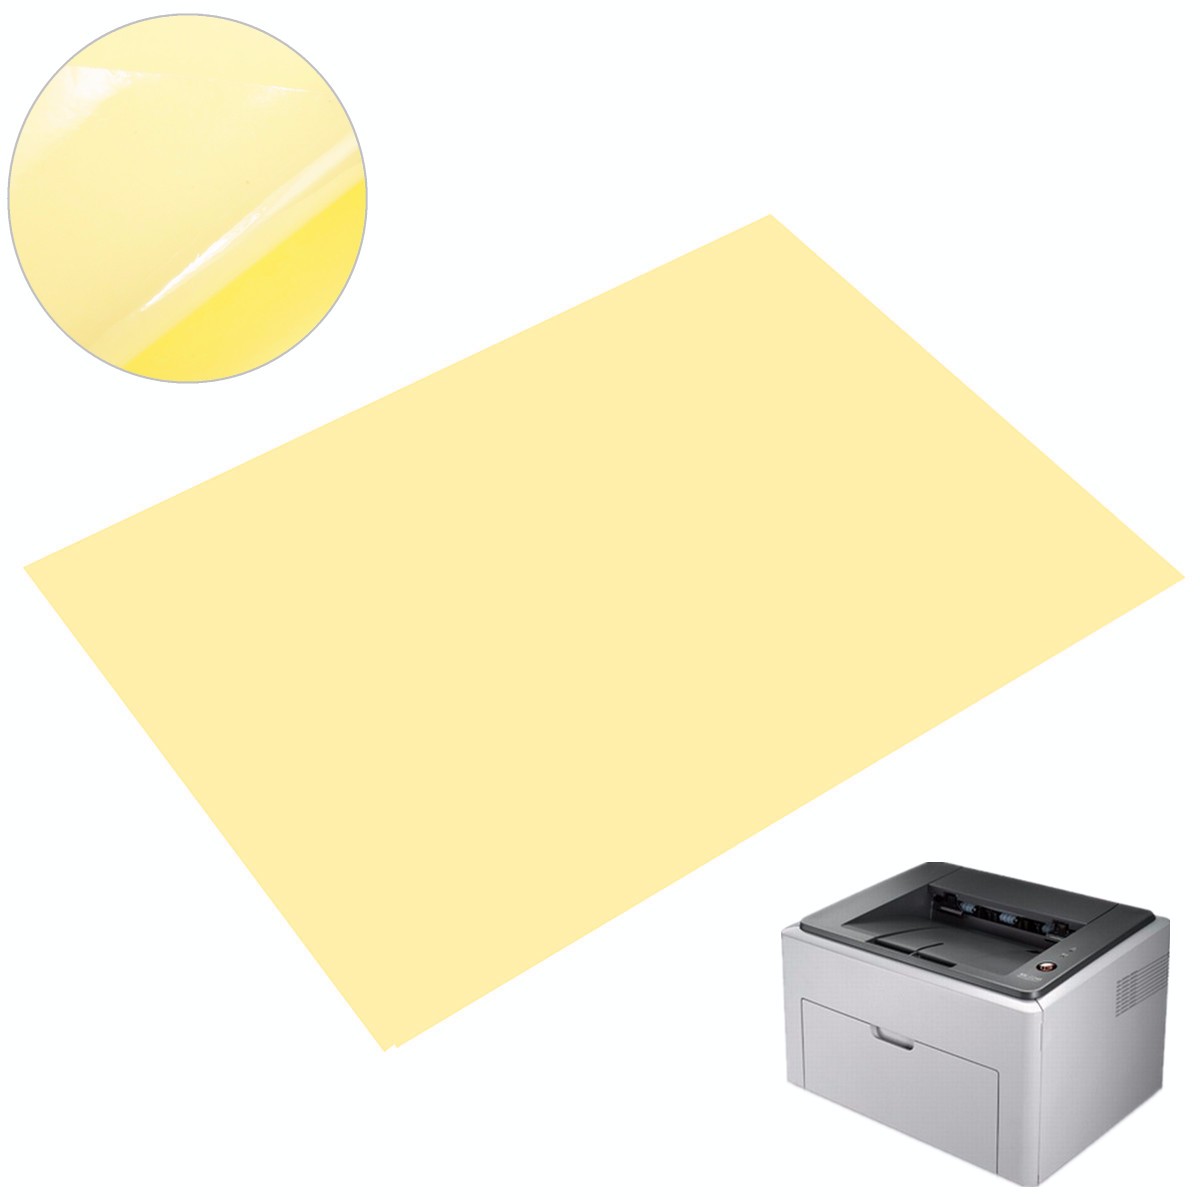 50 Sheets Transparent PVC Vinyl A4 Sticker Thin For Laser Printer And Lamination 